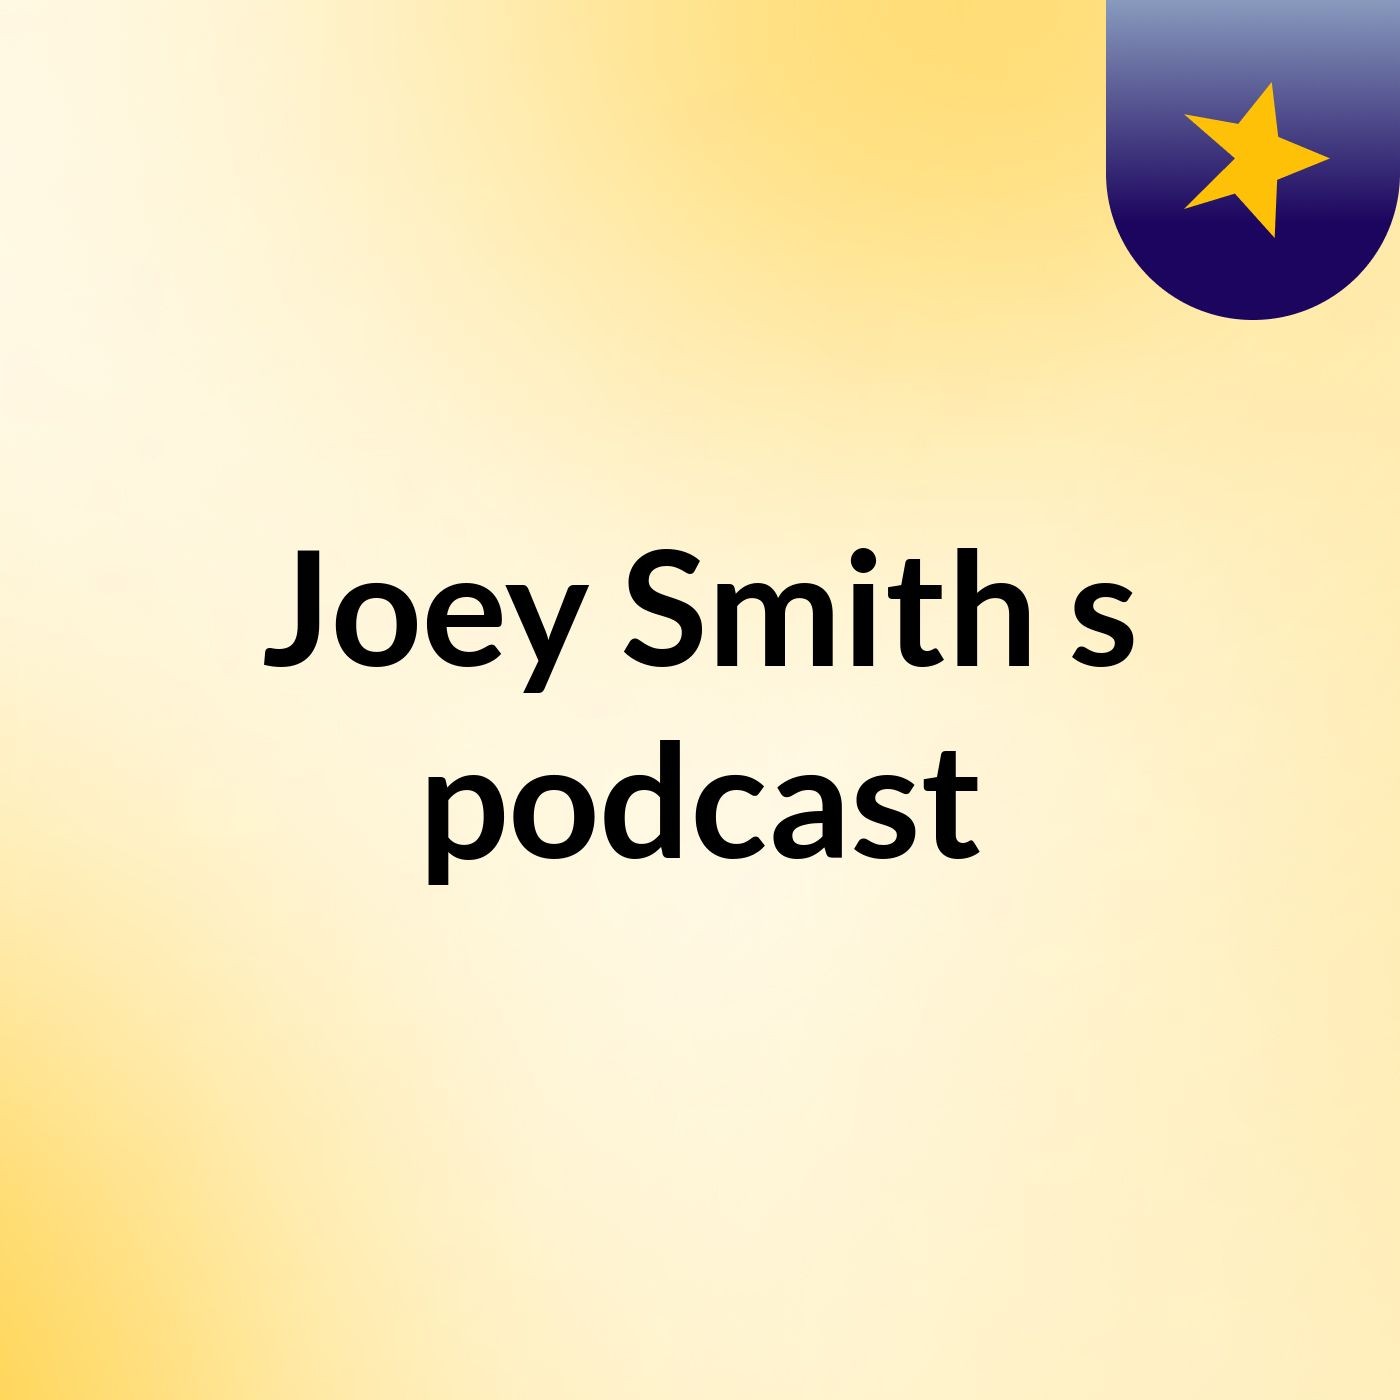 Episode 3 - Joey Smith's podcast